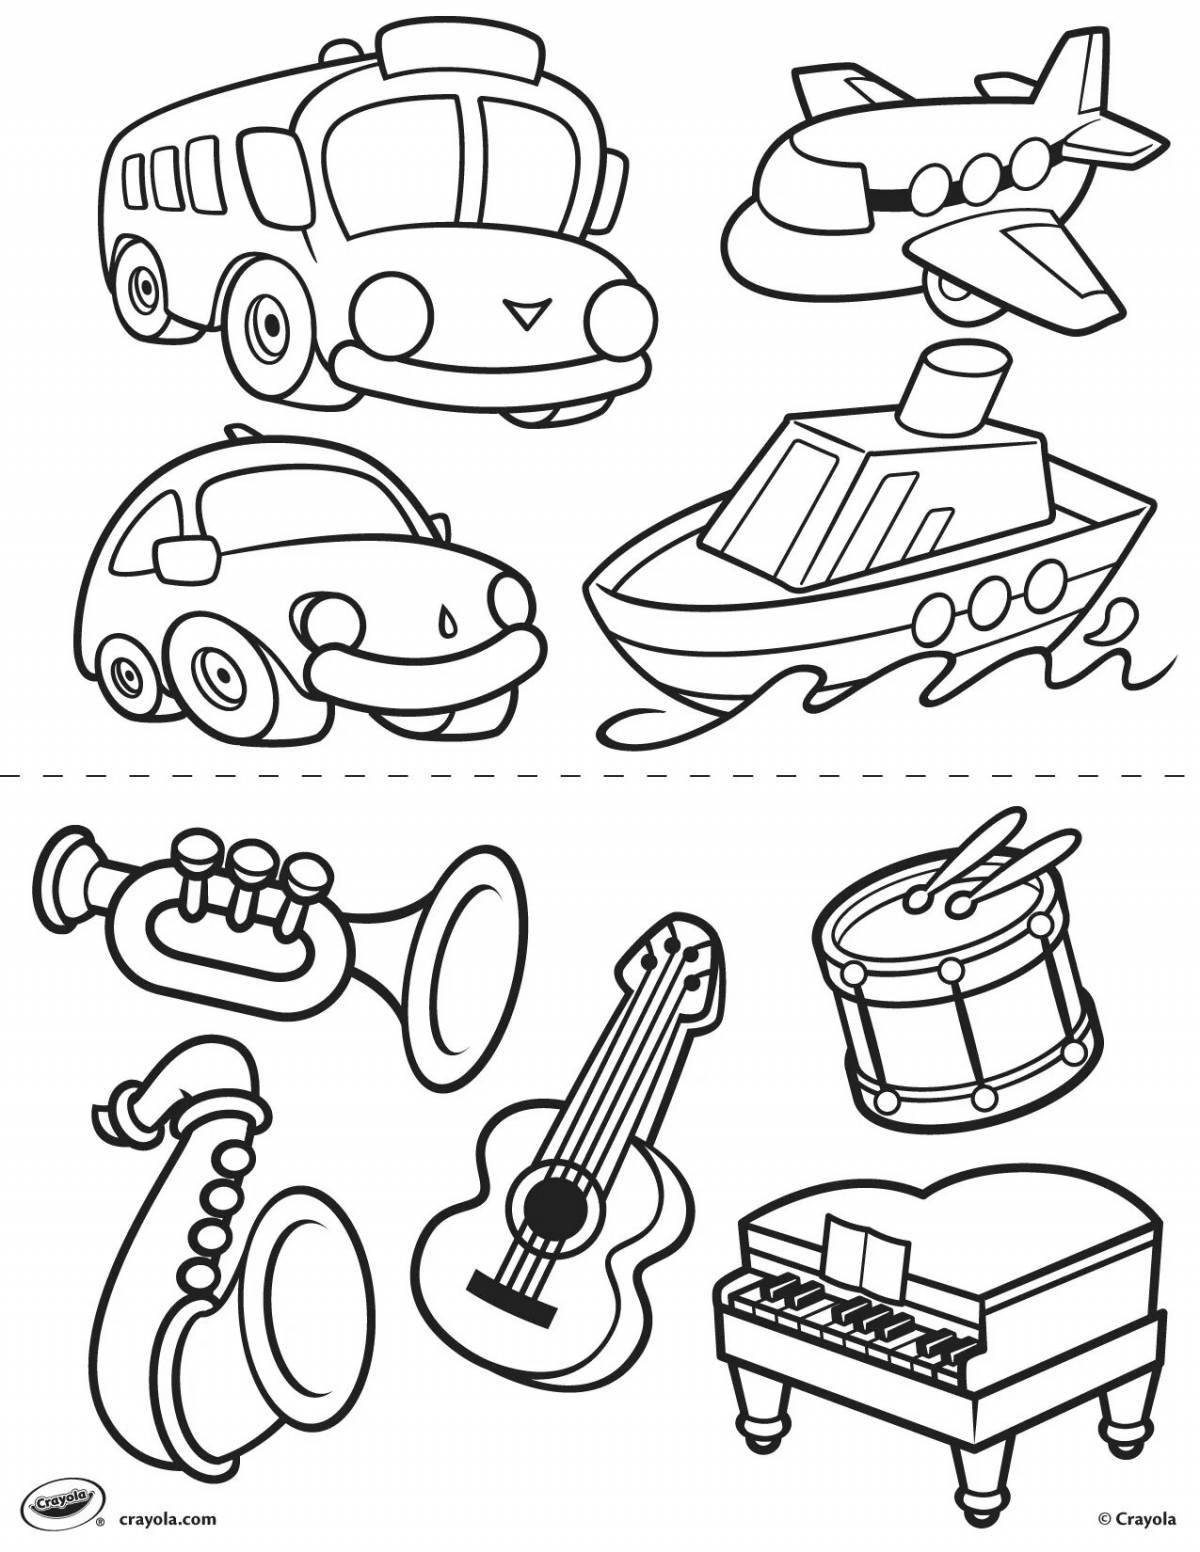 Wonderful transport coloring pages